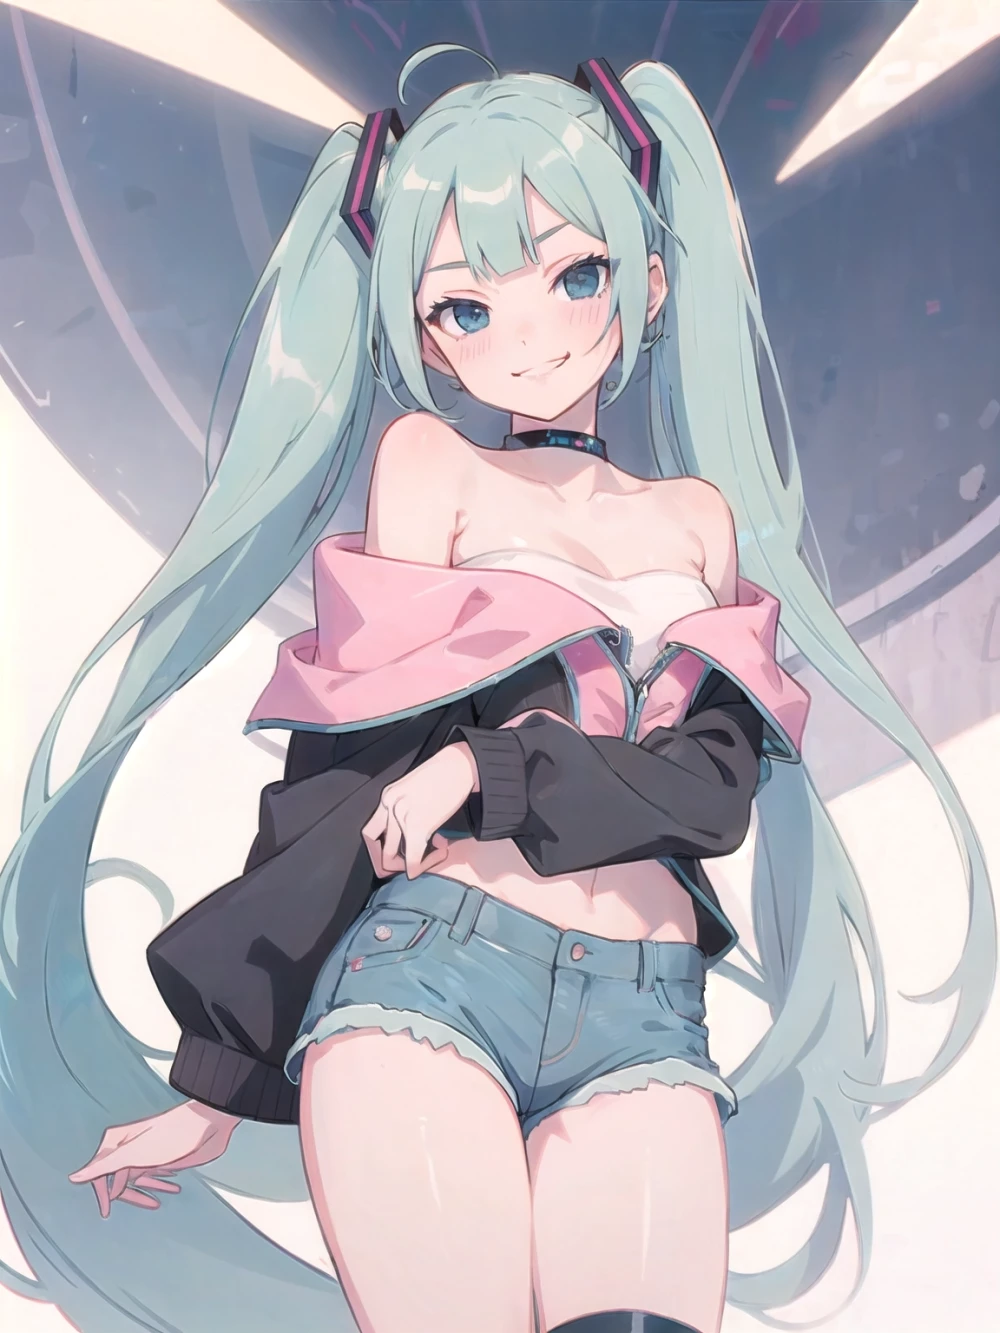 hatsune-miku-anime-style-all-ages-2-8